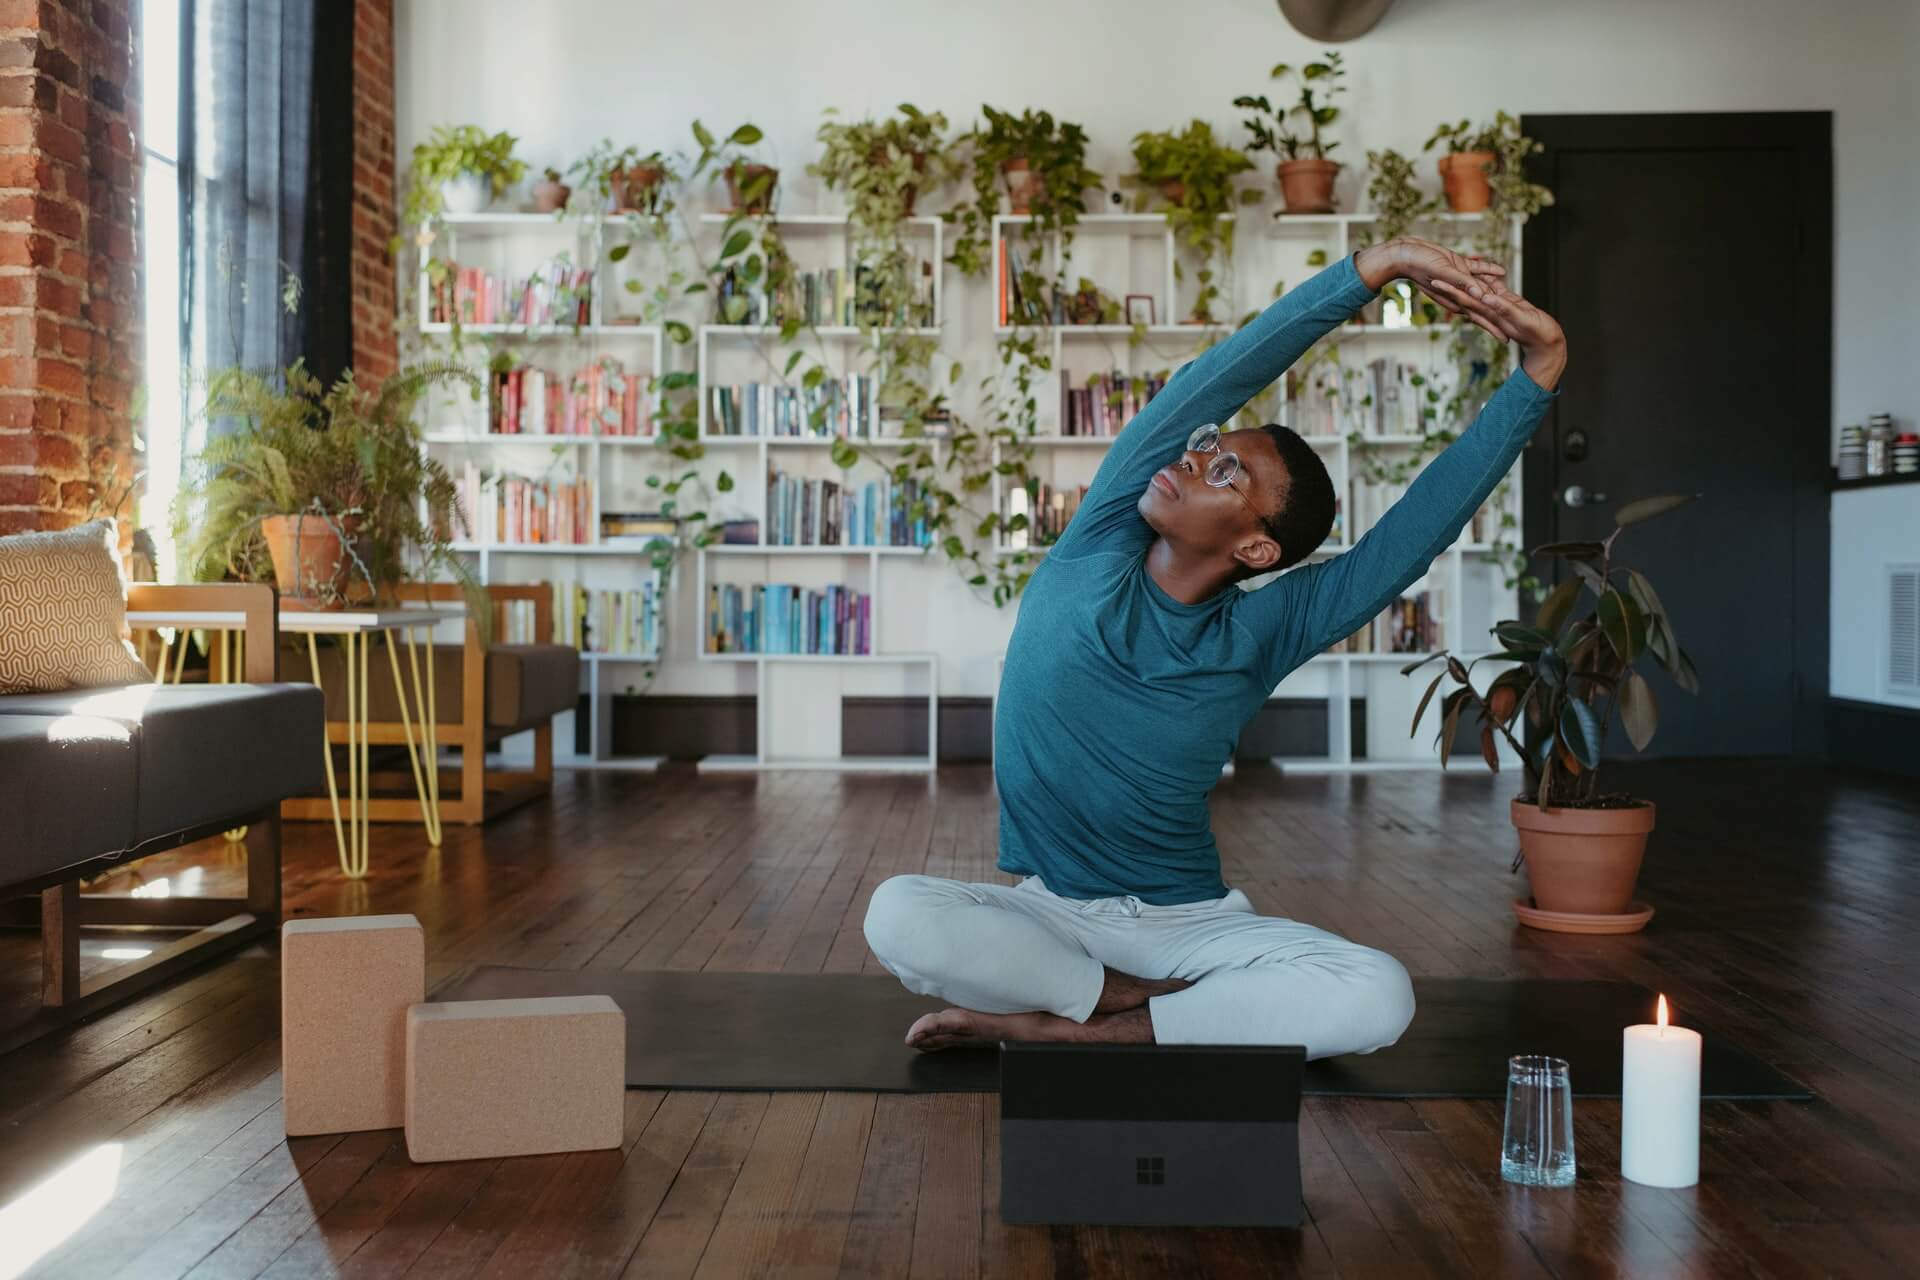 Person stretching on yoga mat with bookshelf and plants in background